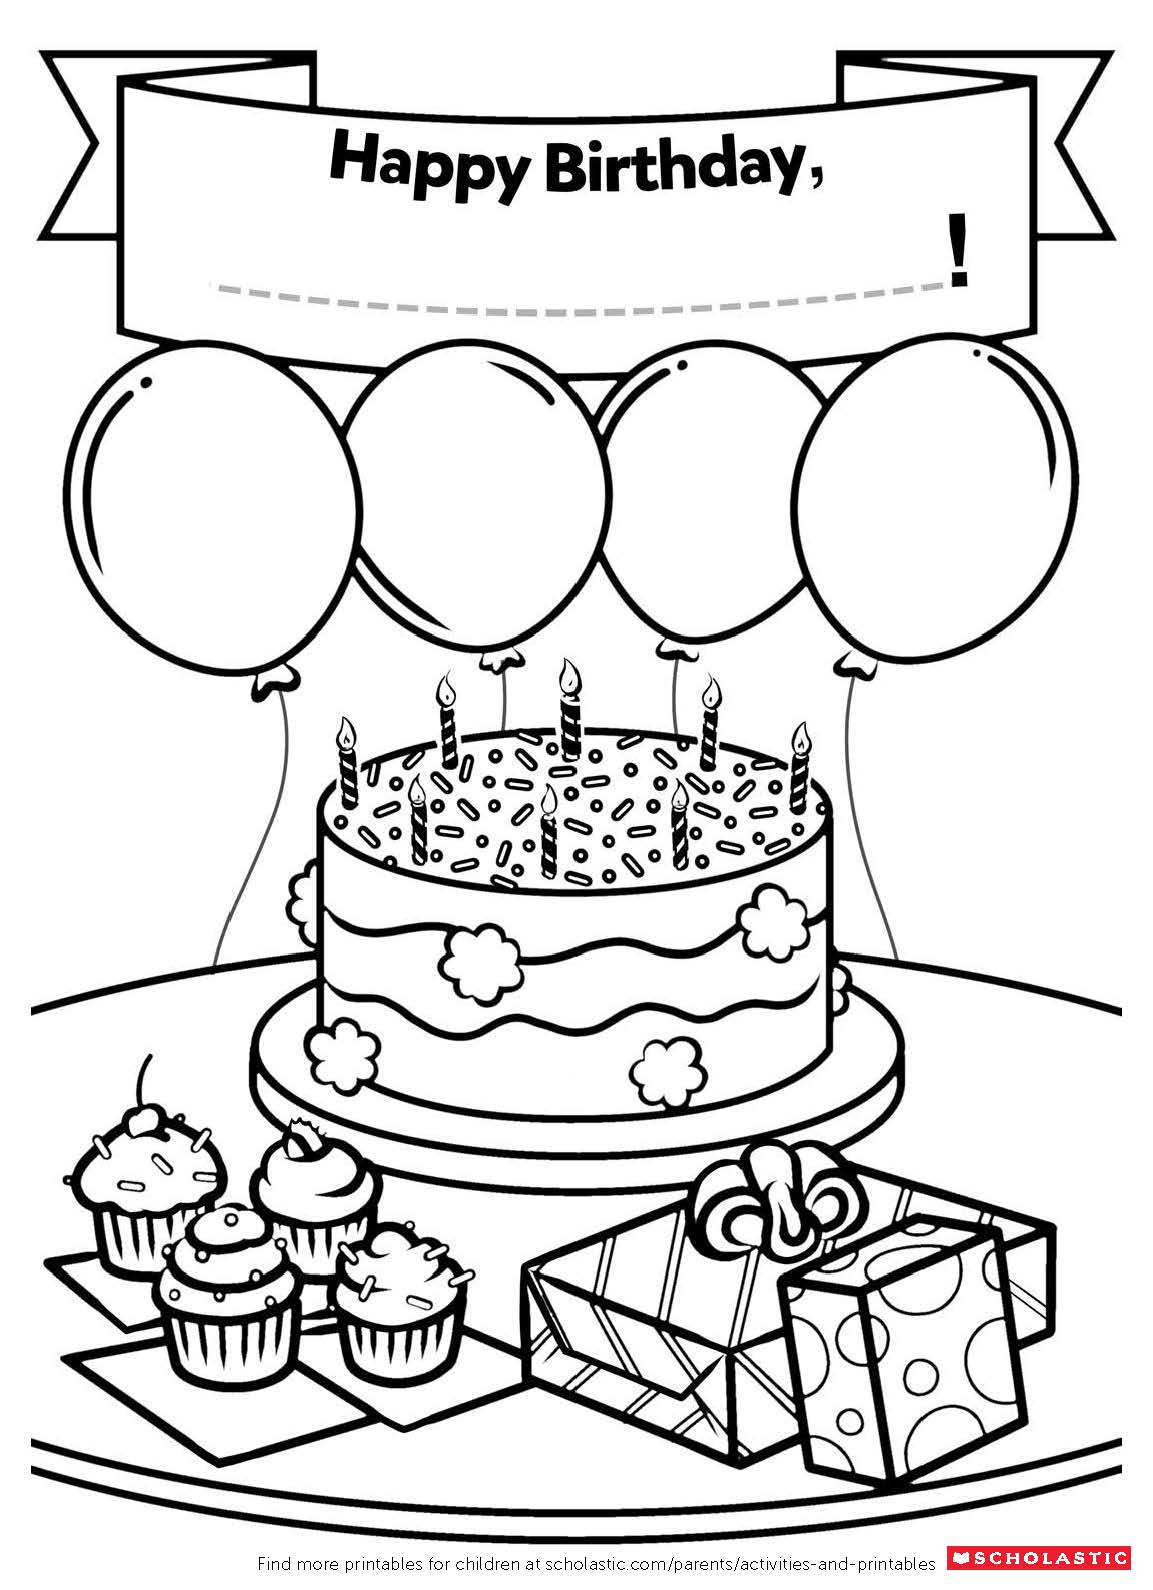 the-best-ideas-for-free-printable-birthday-cards-for-kids-home